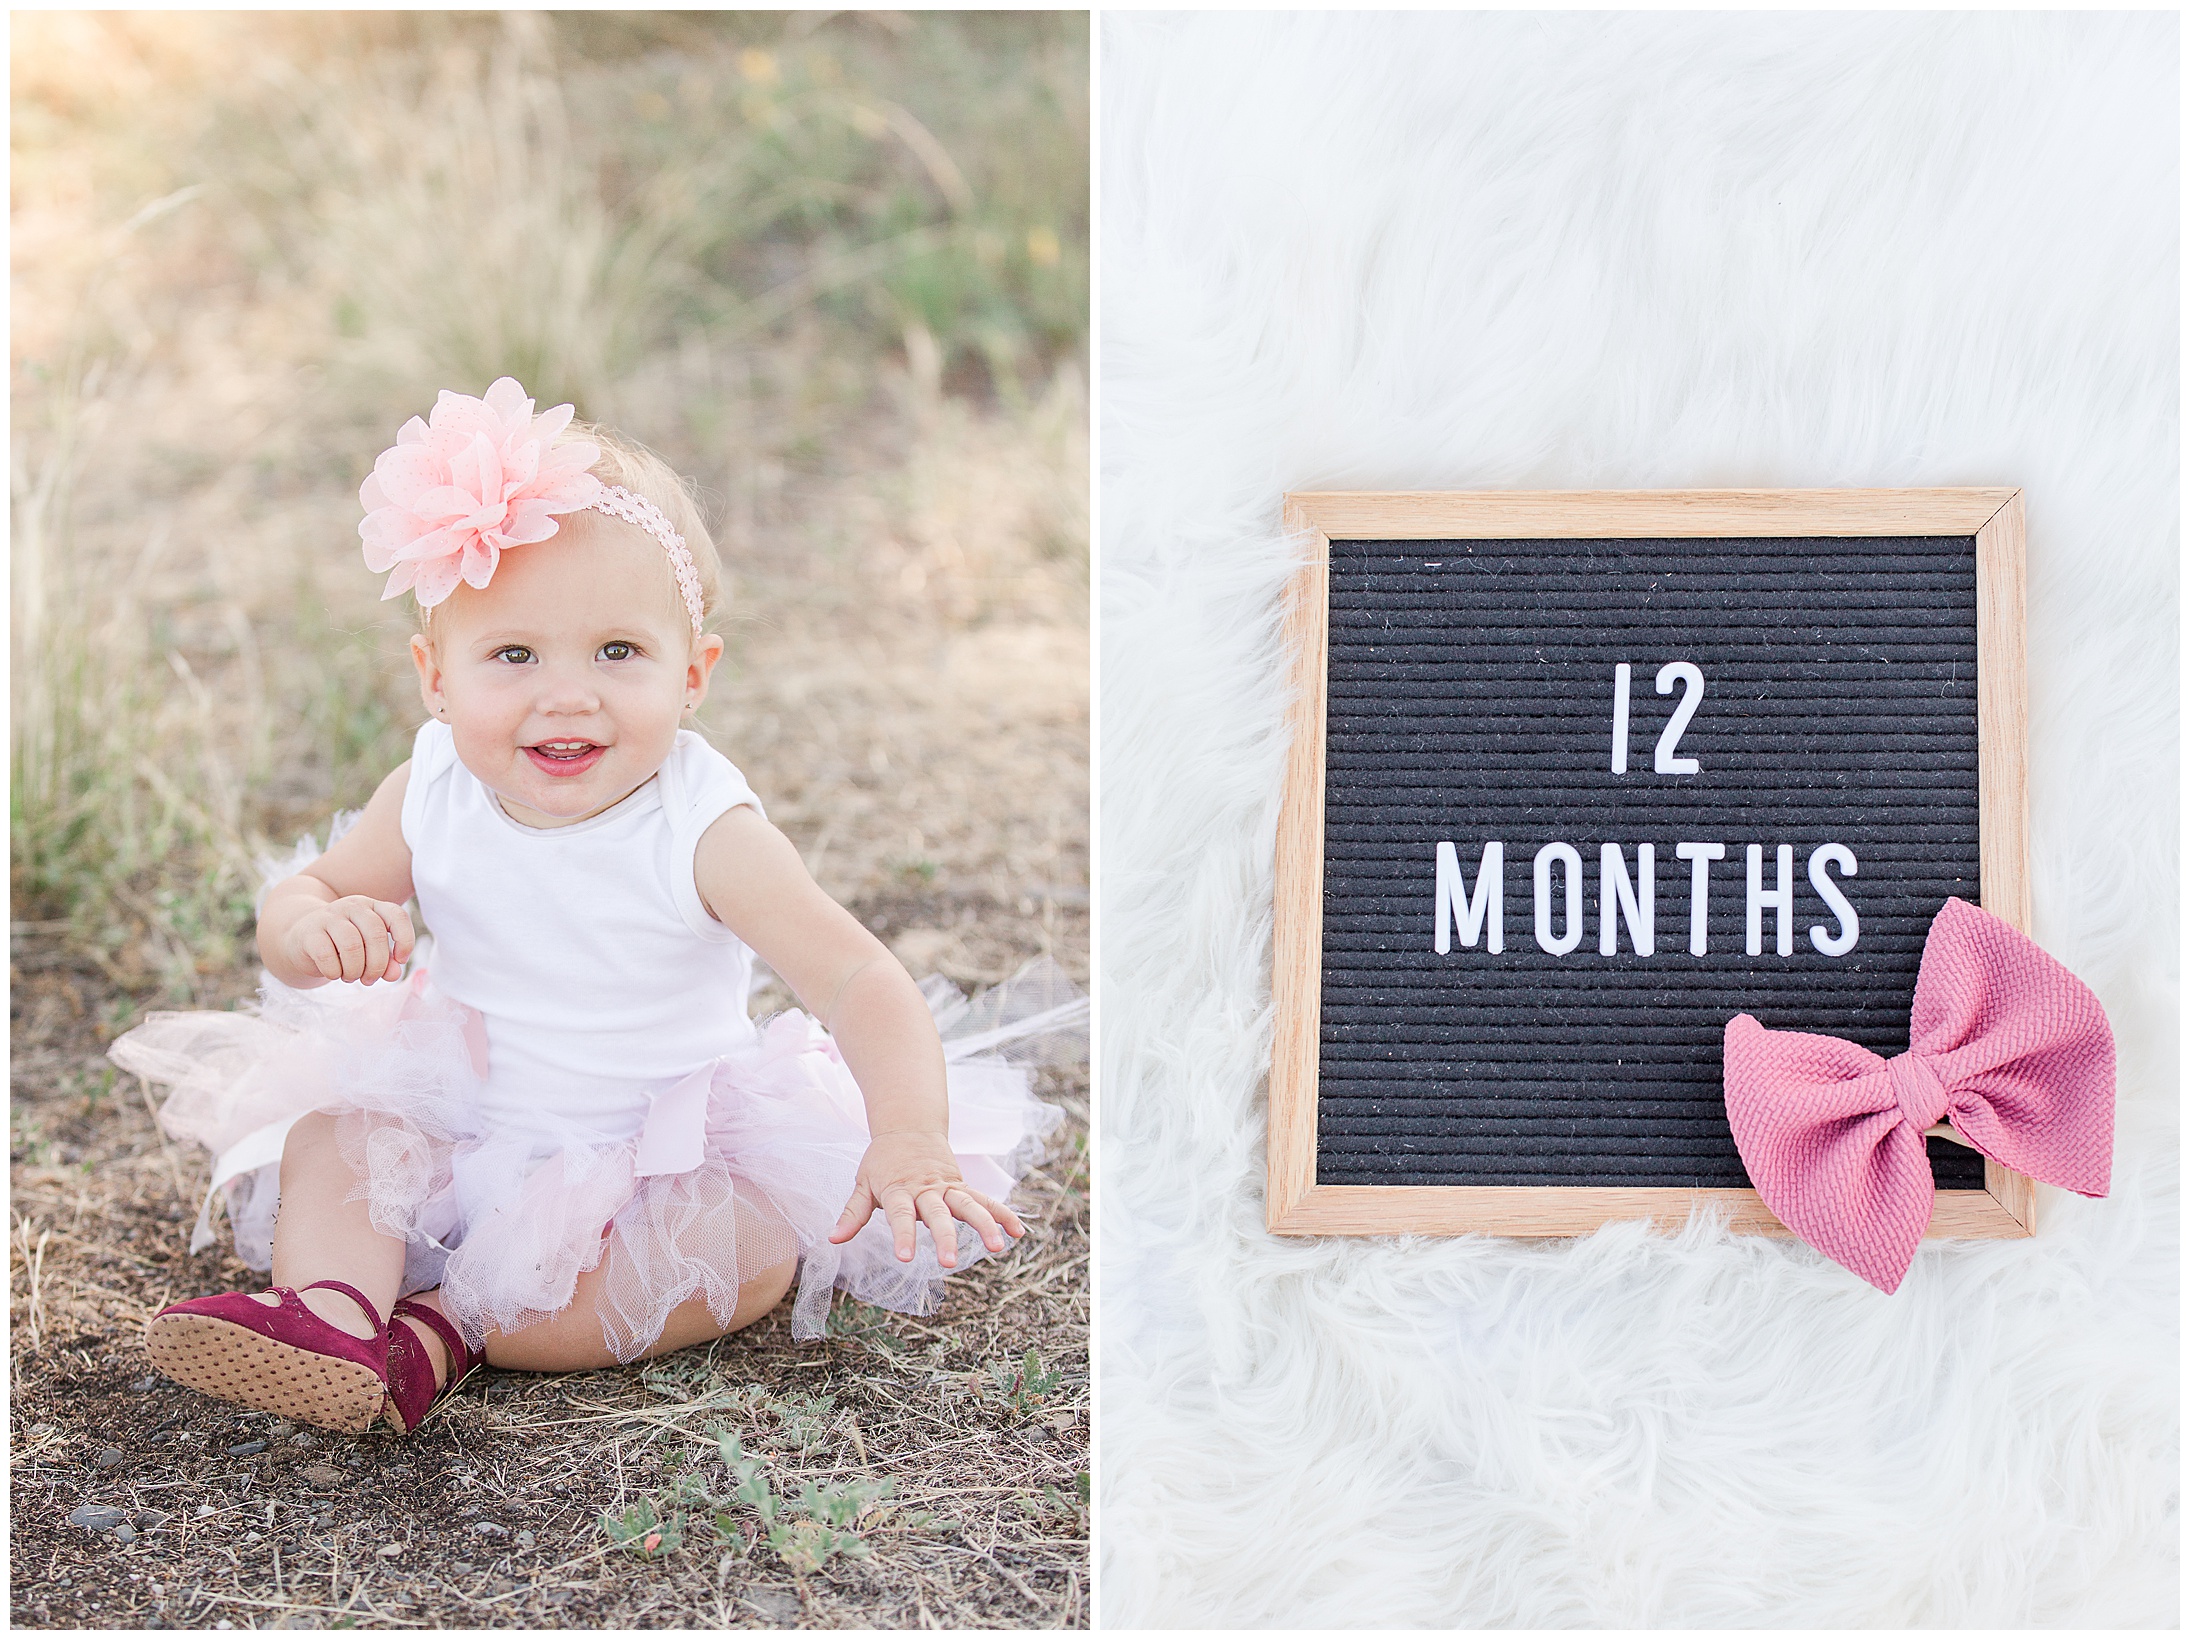 One Year Old Birthday Grass Field Chico California Mommy and Me Rocking Chair Blanket Letterboard Headband,